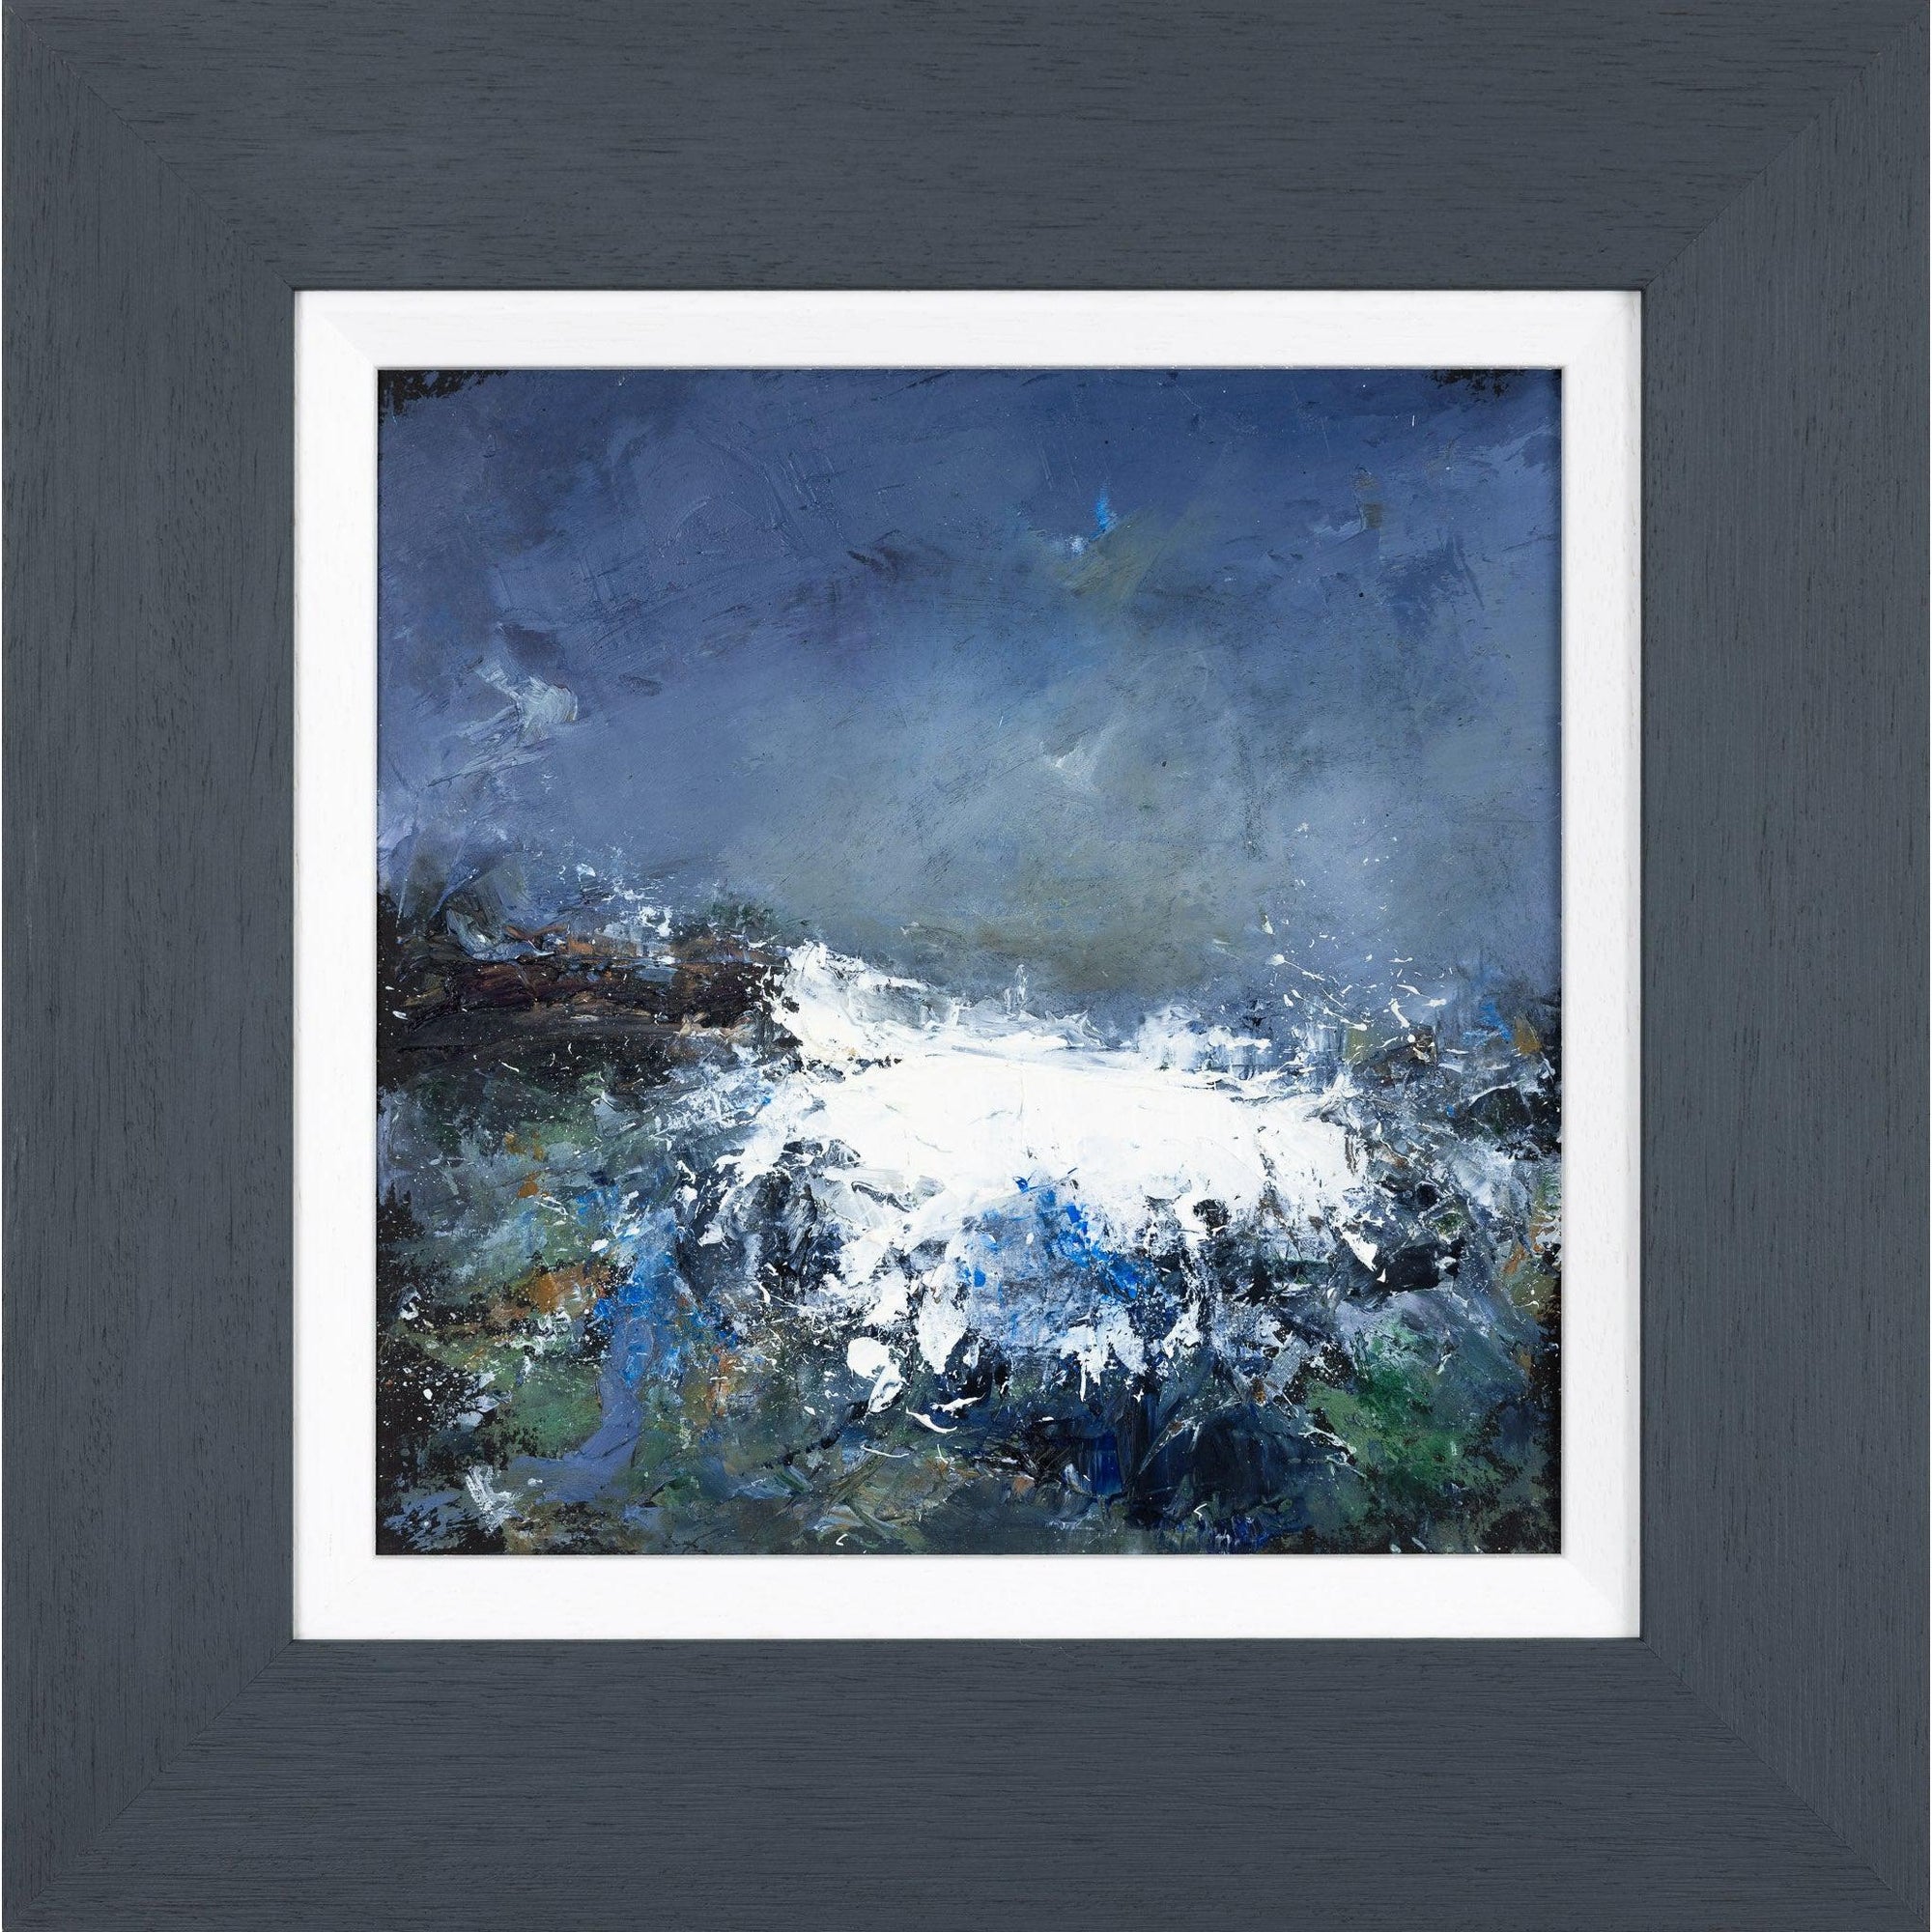 'Wild Waves V' oil on board original by Ian Rawnsley, available at Padstow Gallery, Cornwall